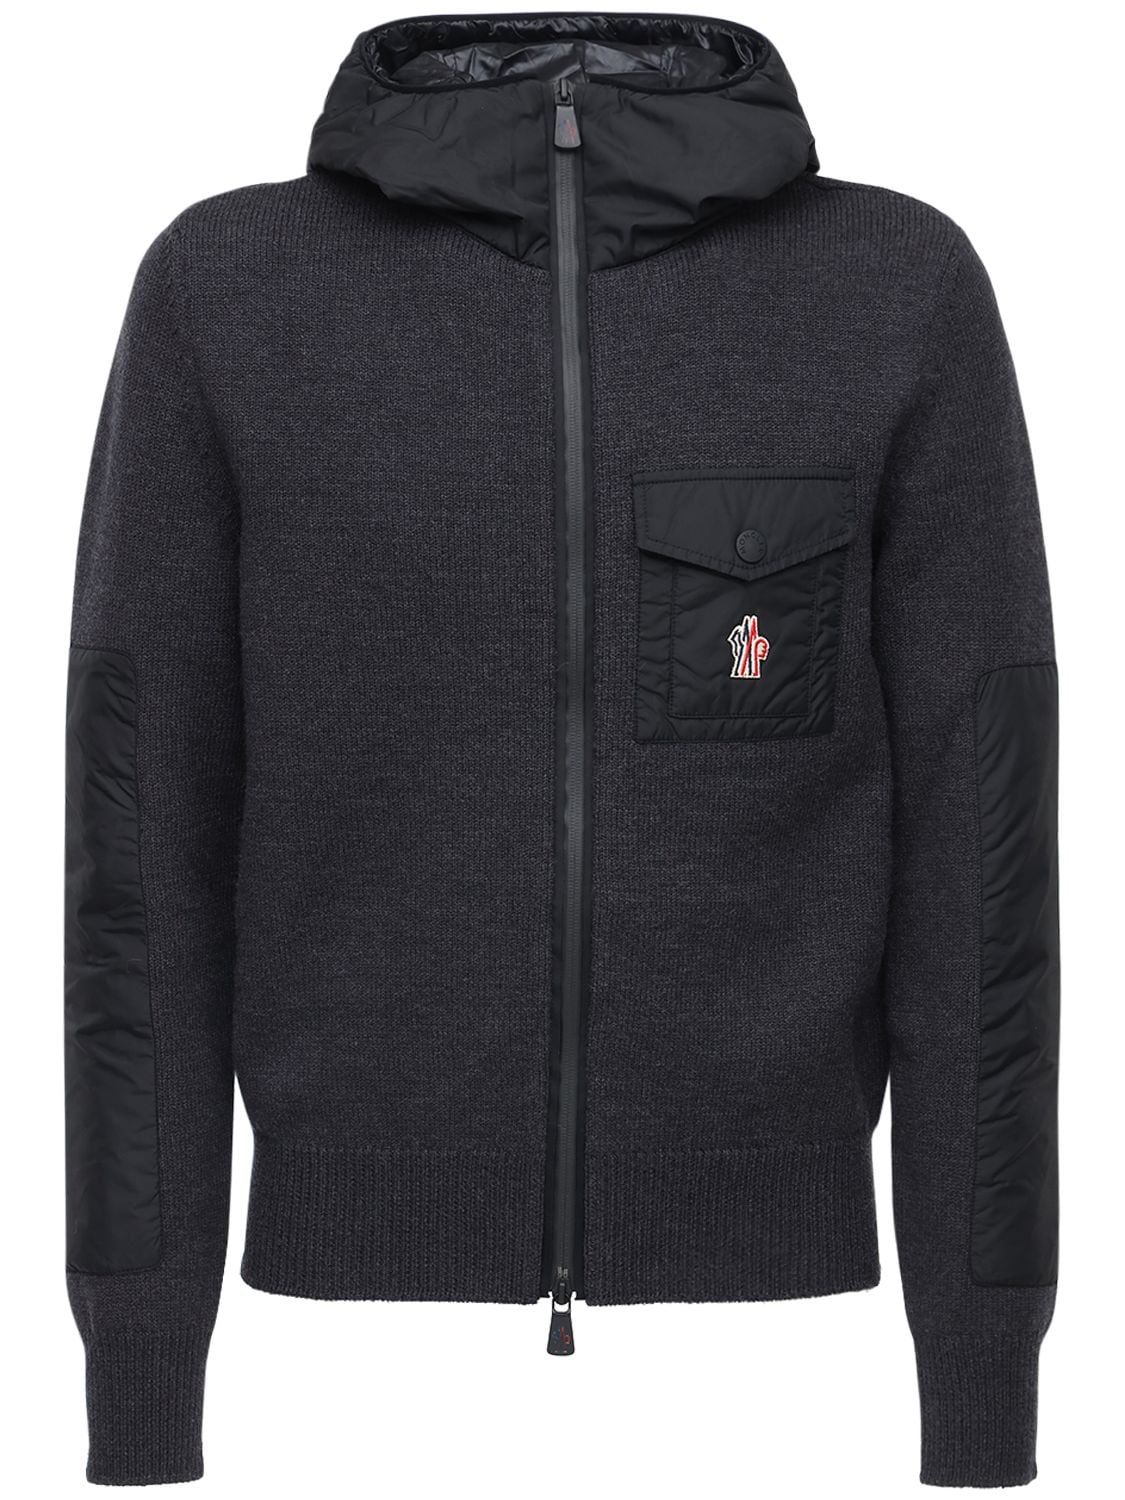 MONCLER WOOL TRICOT KNIT ZIP-UP SWEATER,74IL72018-OTCY0